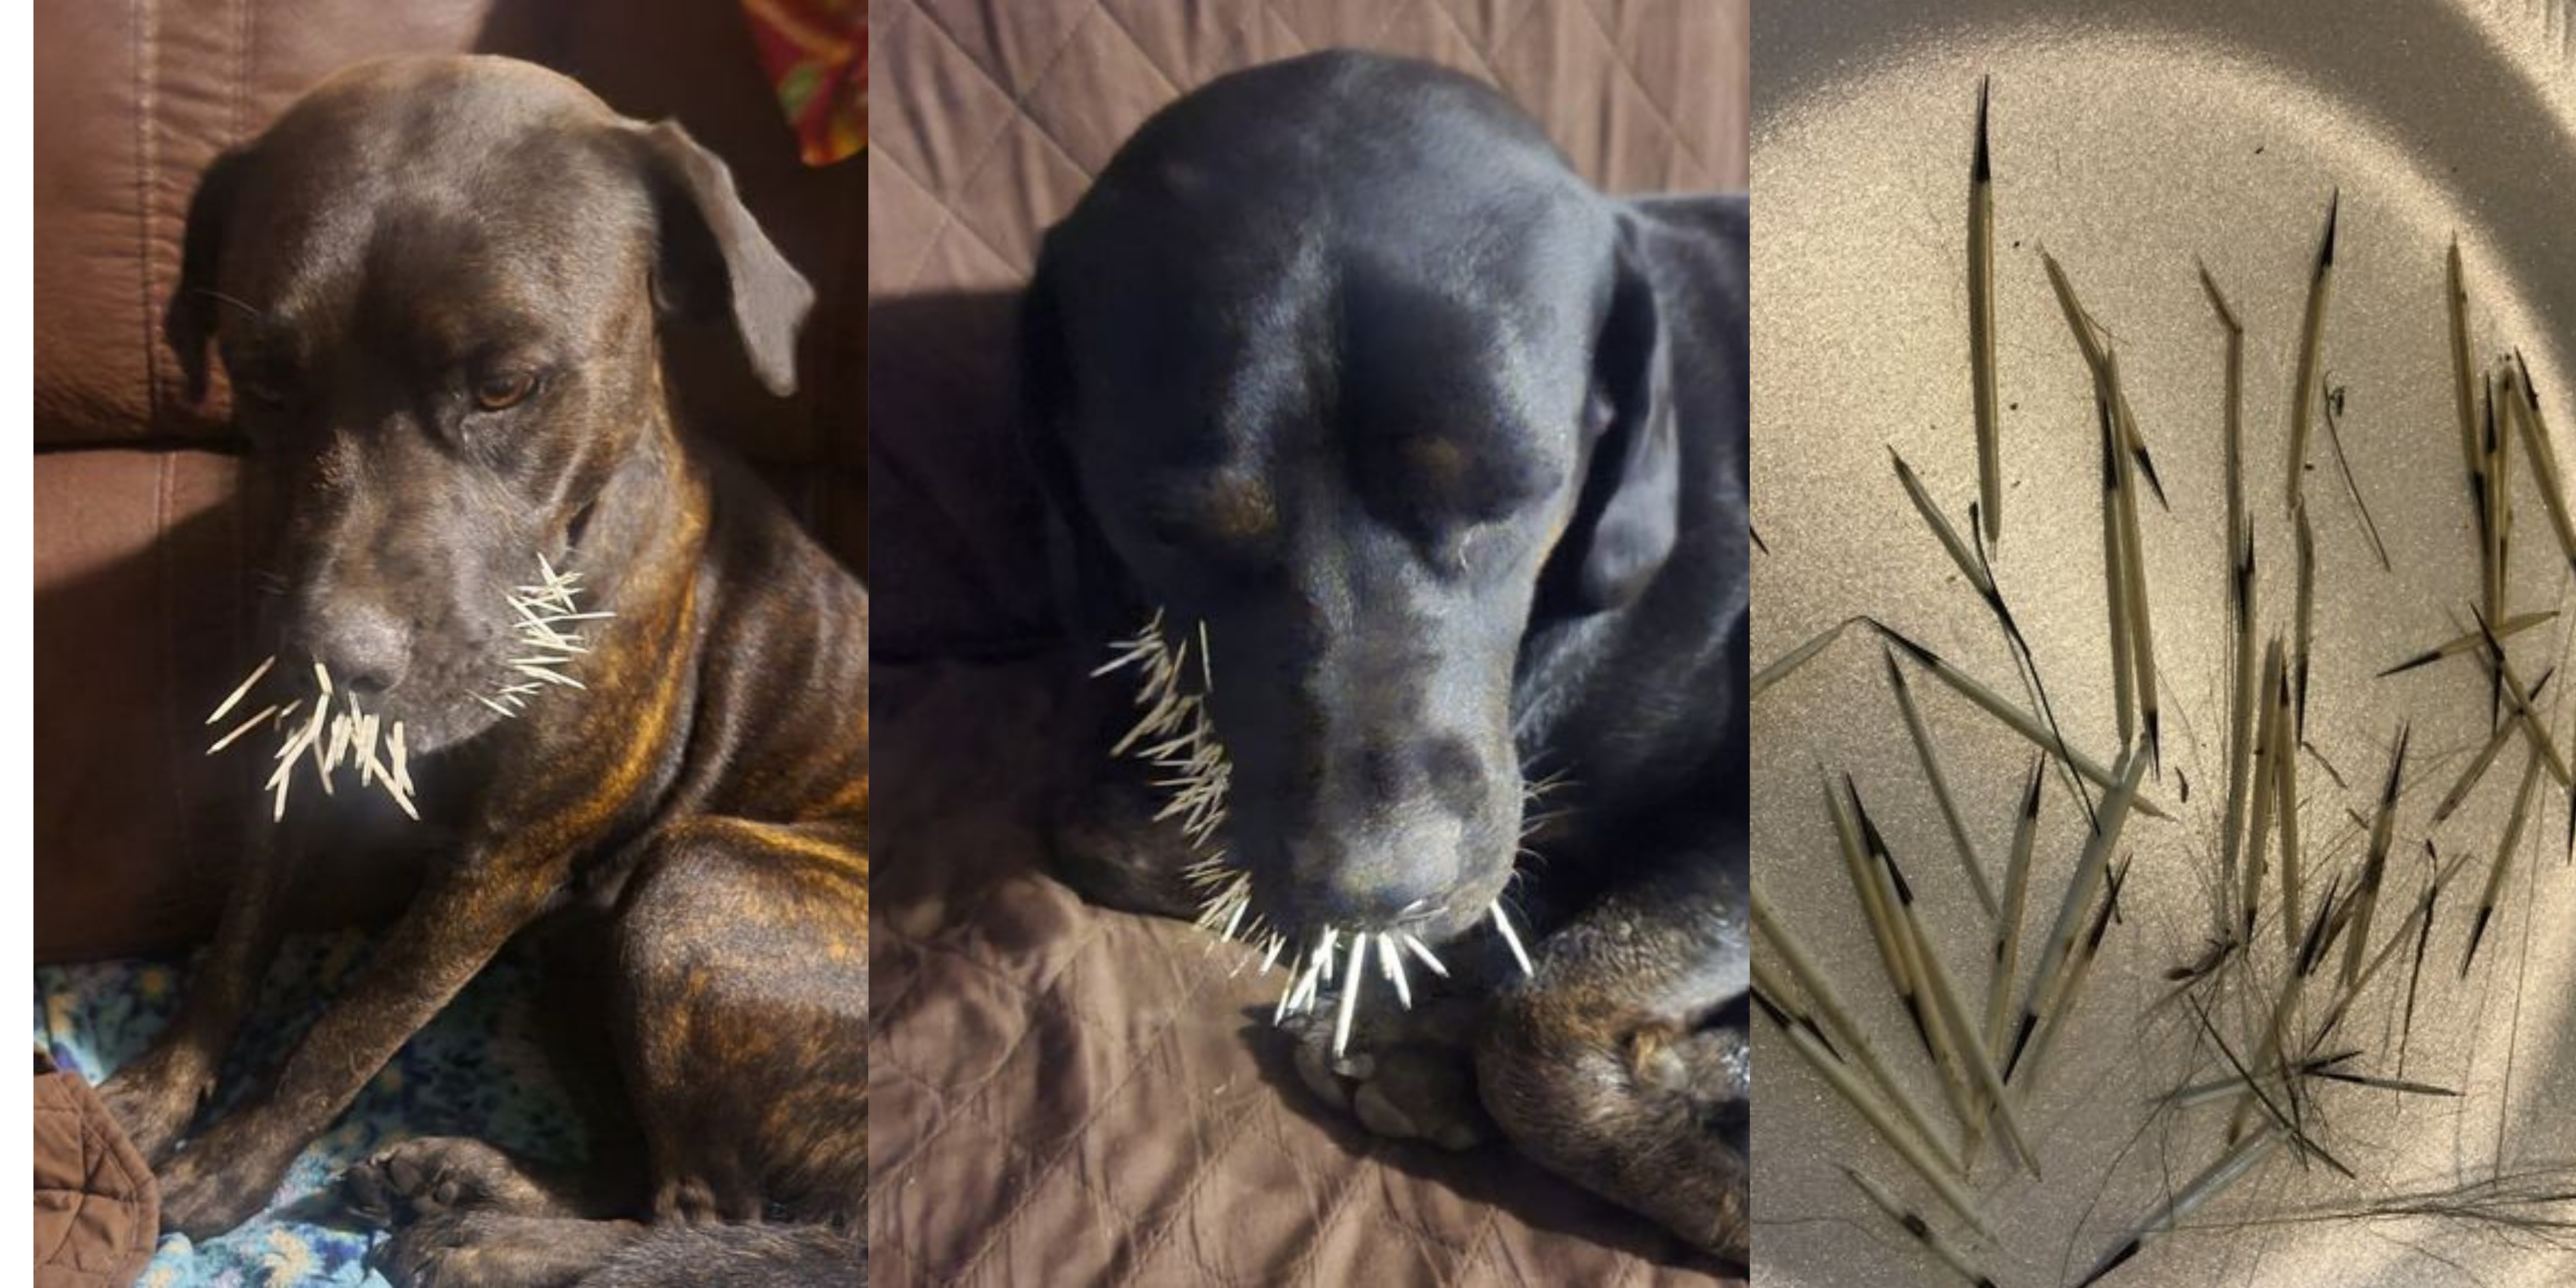 What To Do If a Porcupine Quills Your Dog